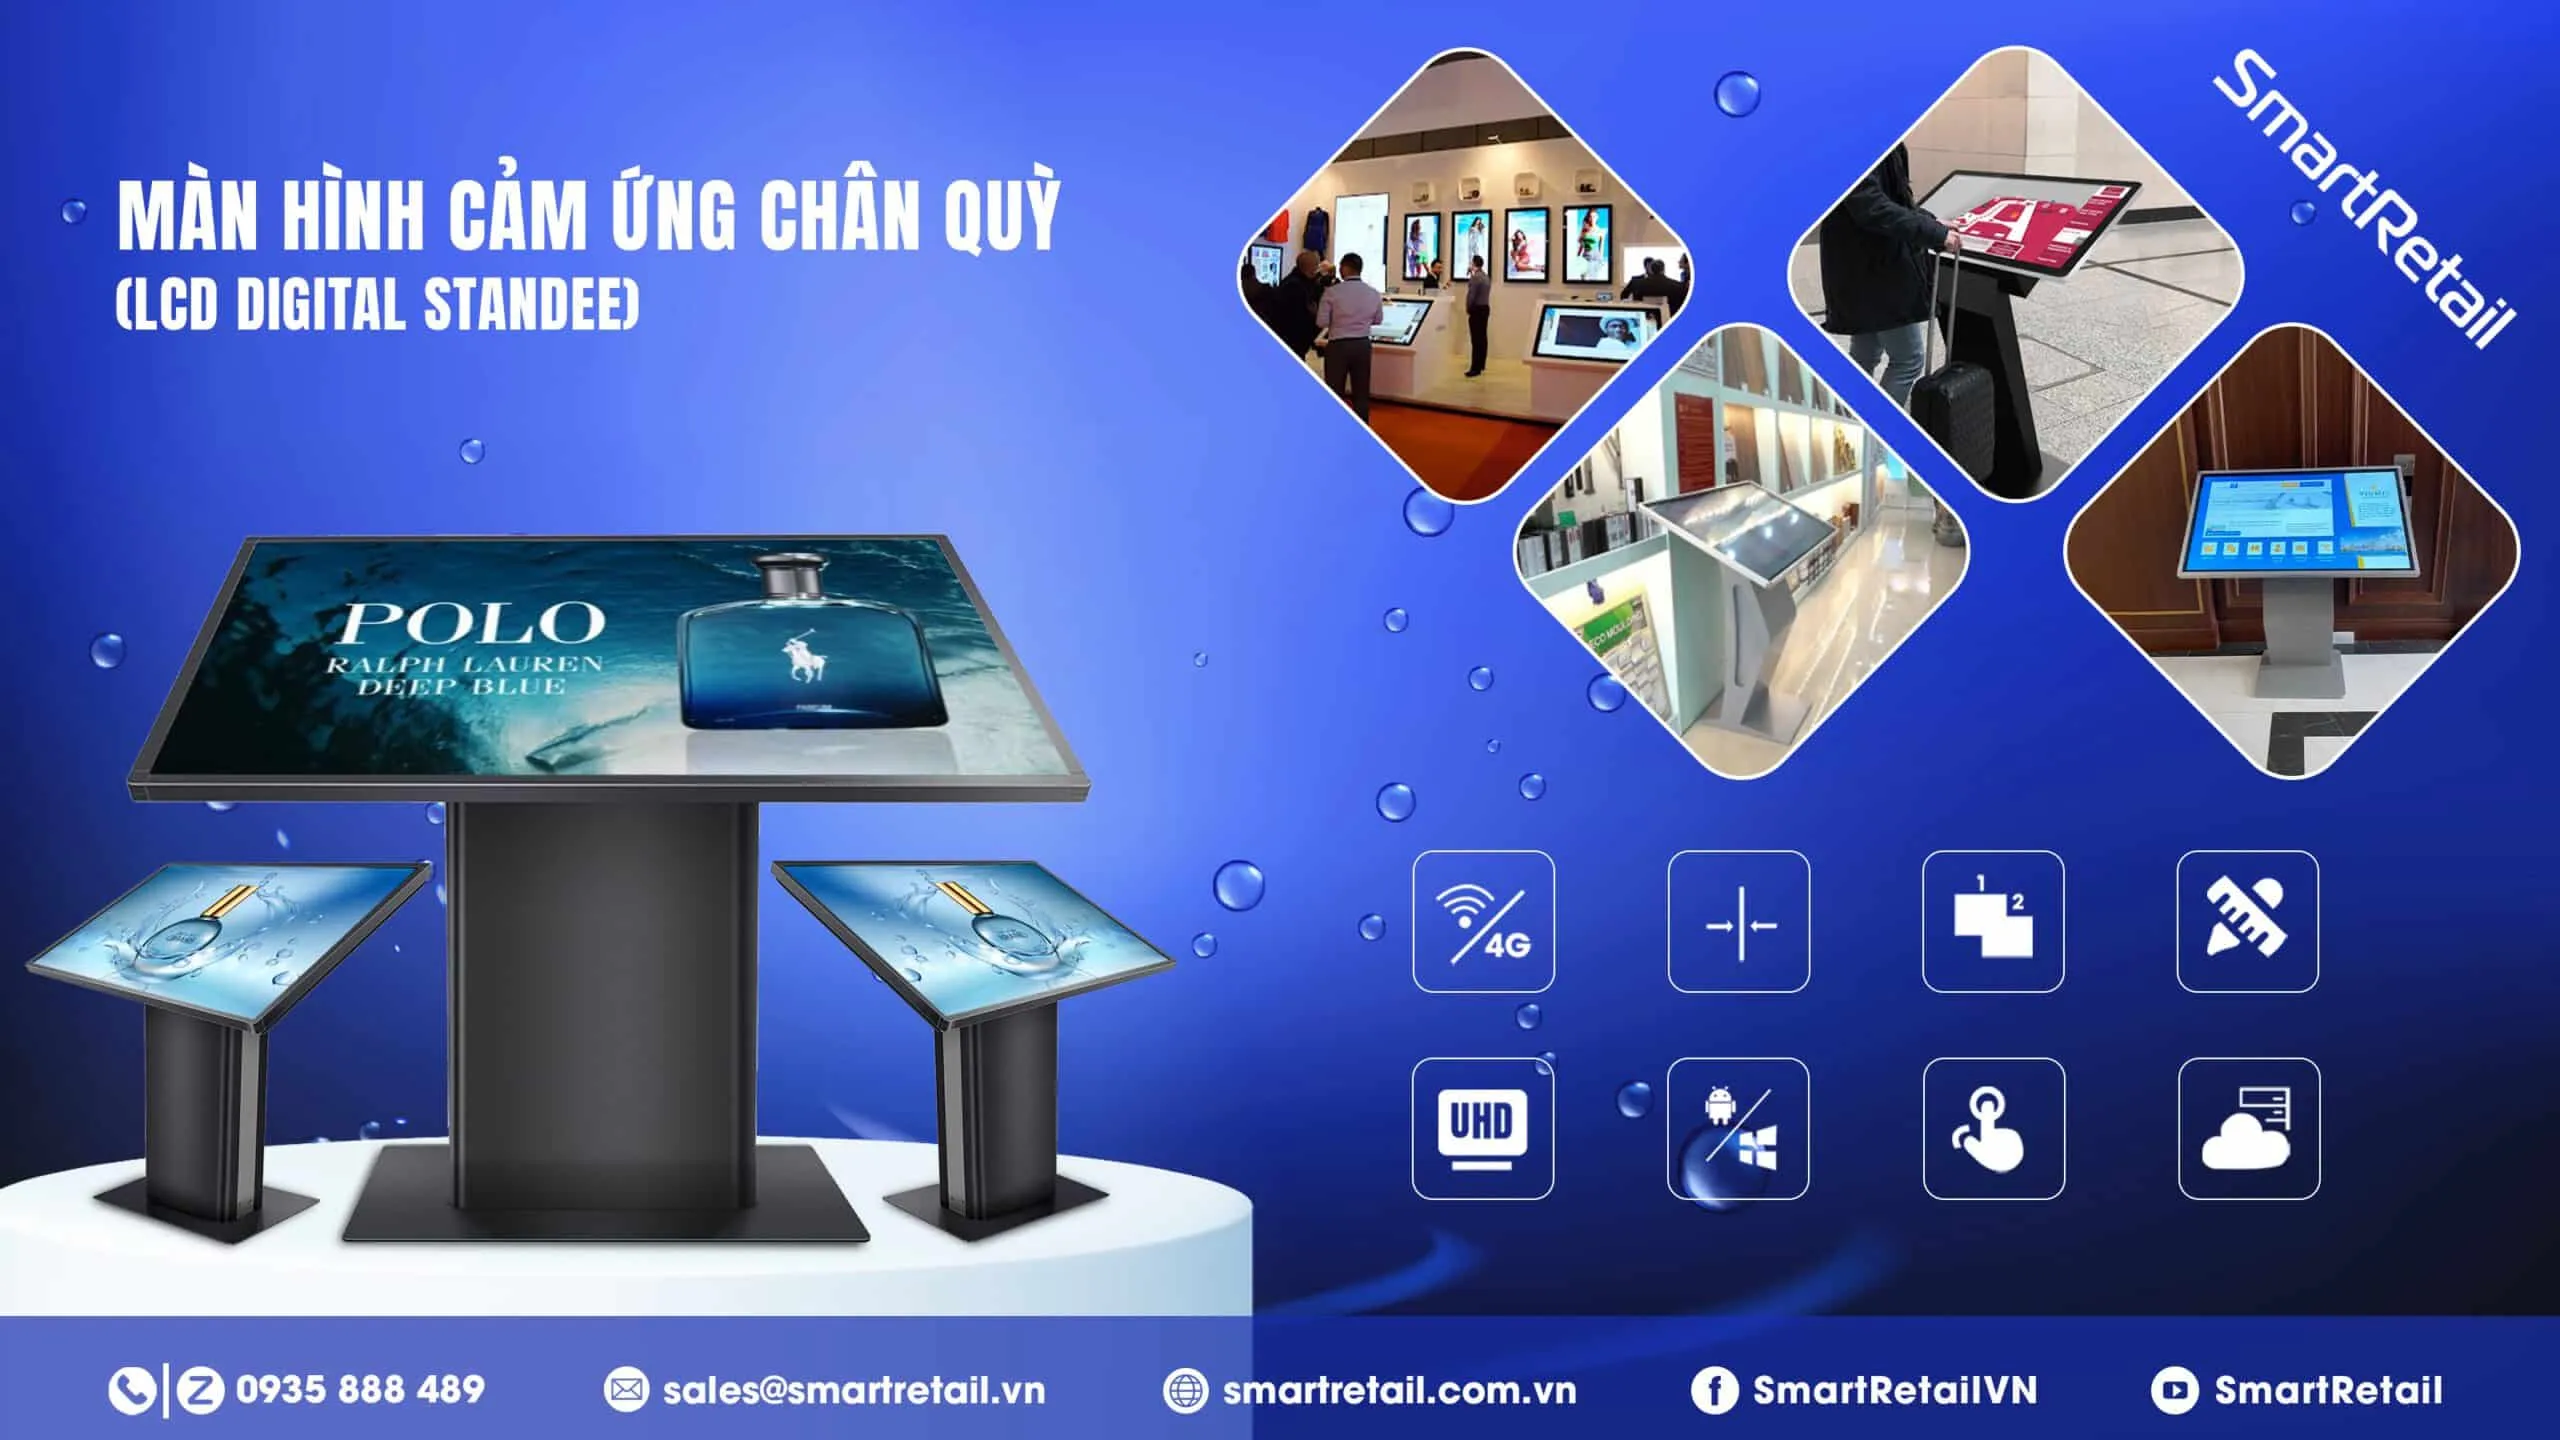 Man Hinh Quang Cao (lcd Digital Signage) Gia Re Nhat Hcm Smartretail